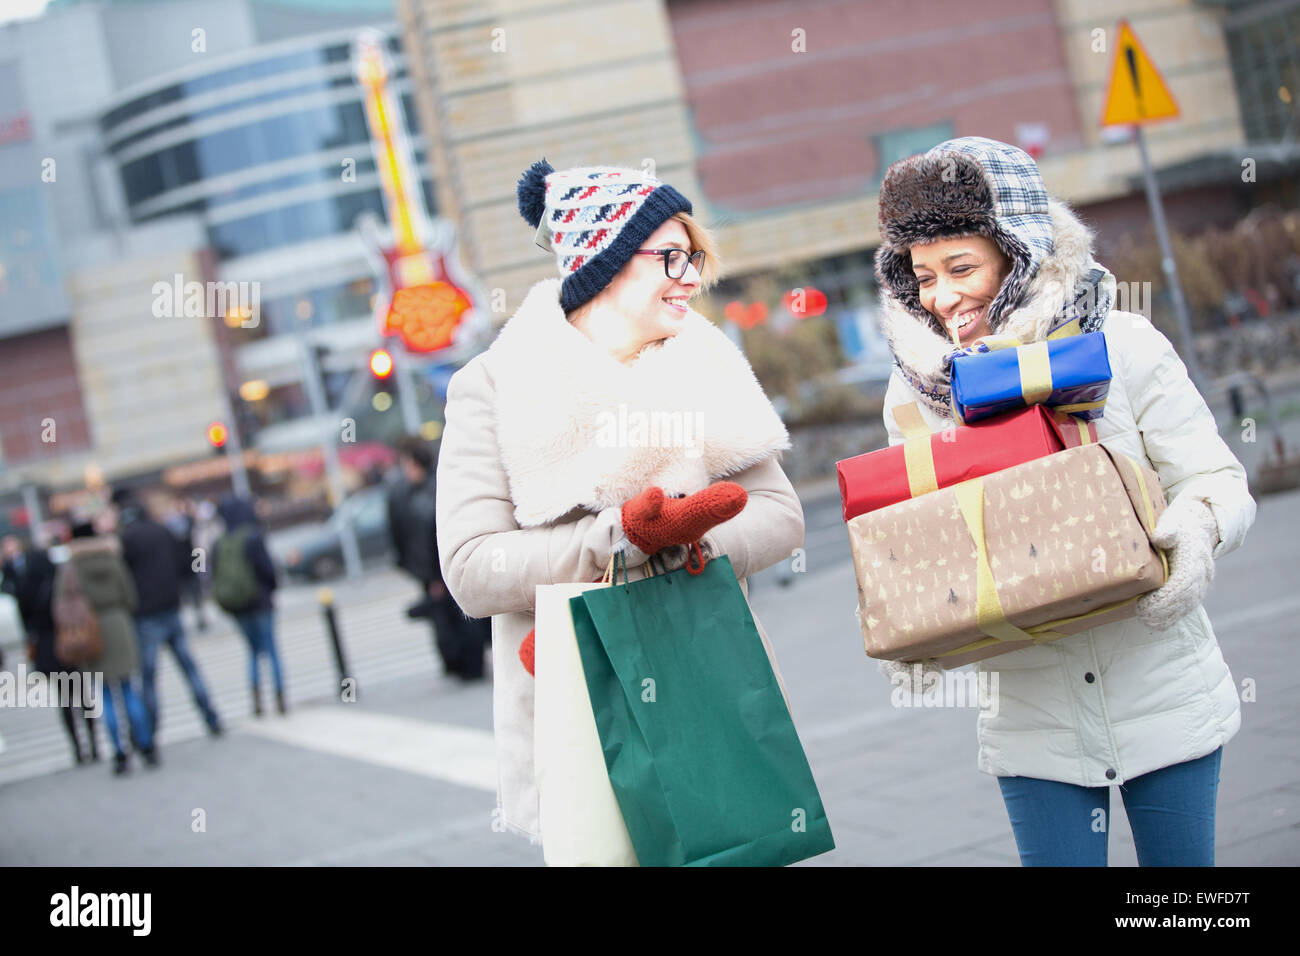 Happy women with gifts and shopping bags walking on city street during winter Stock Photo